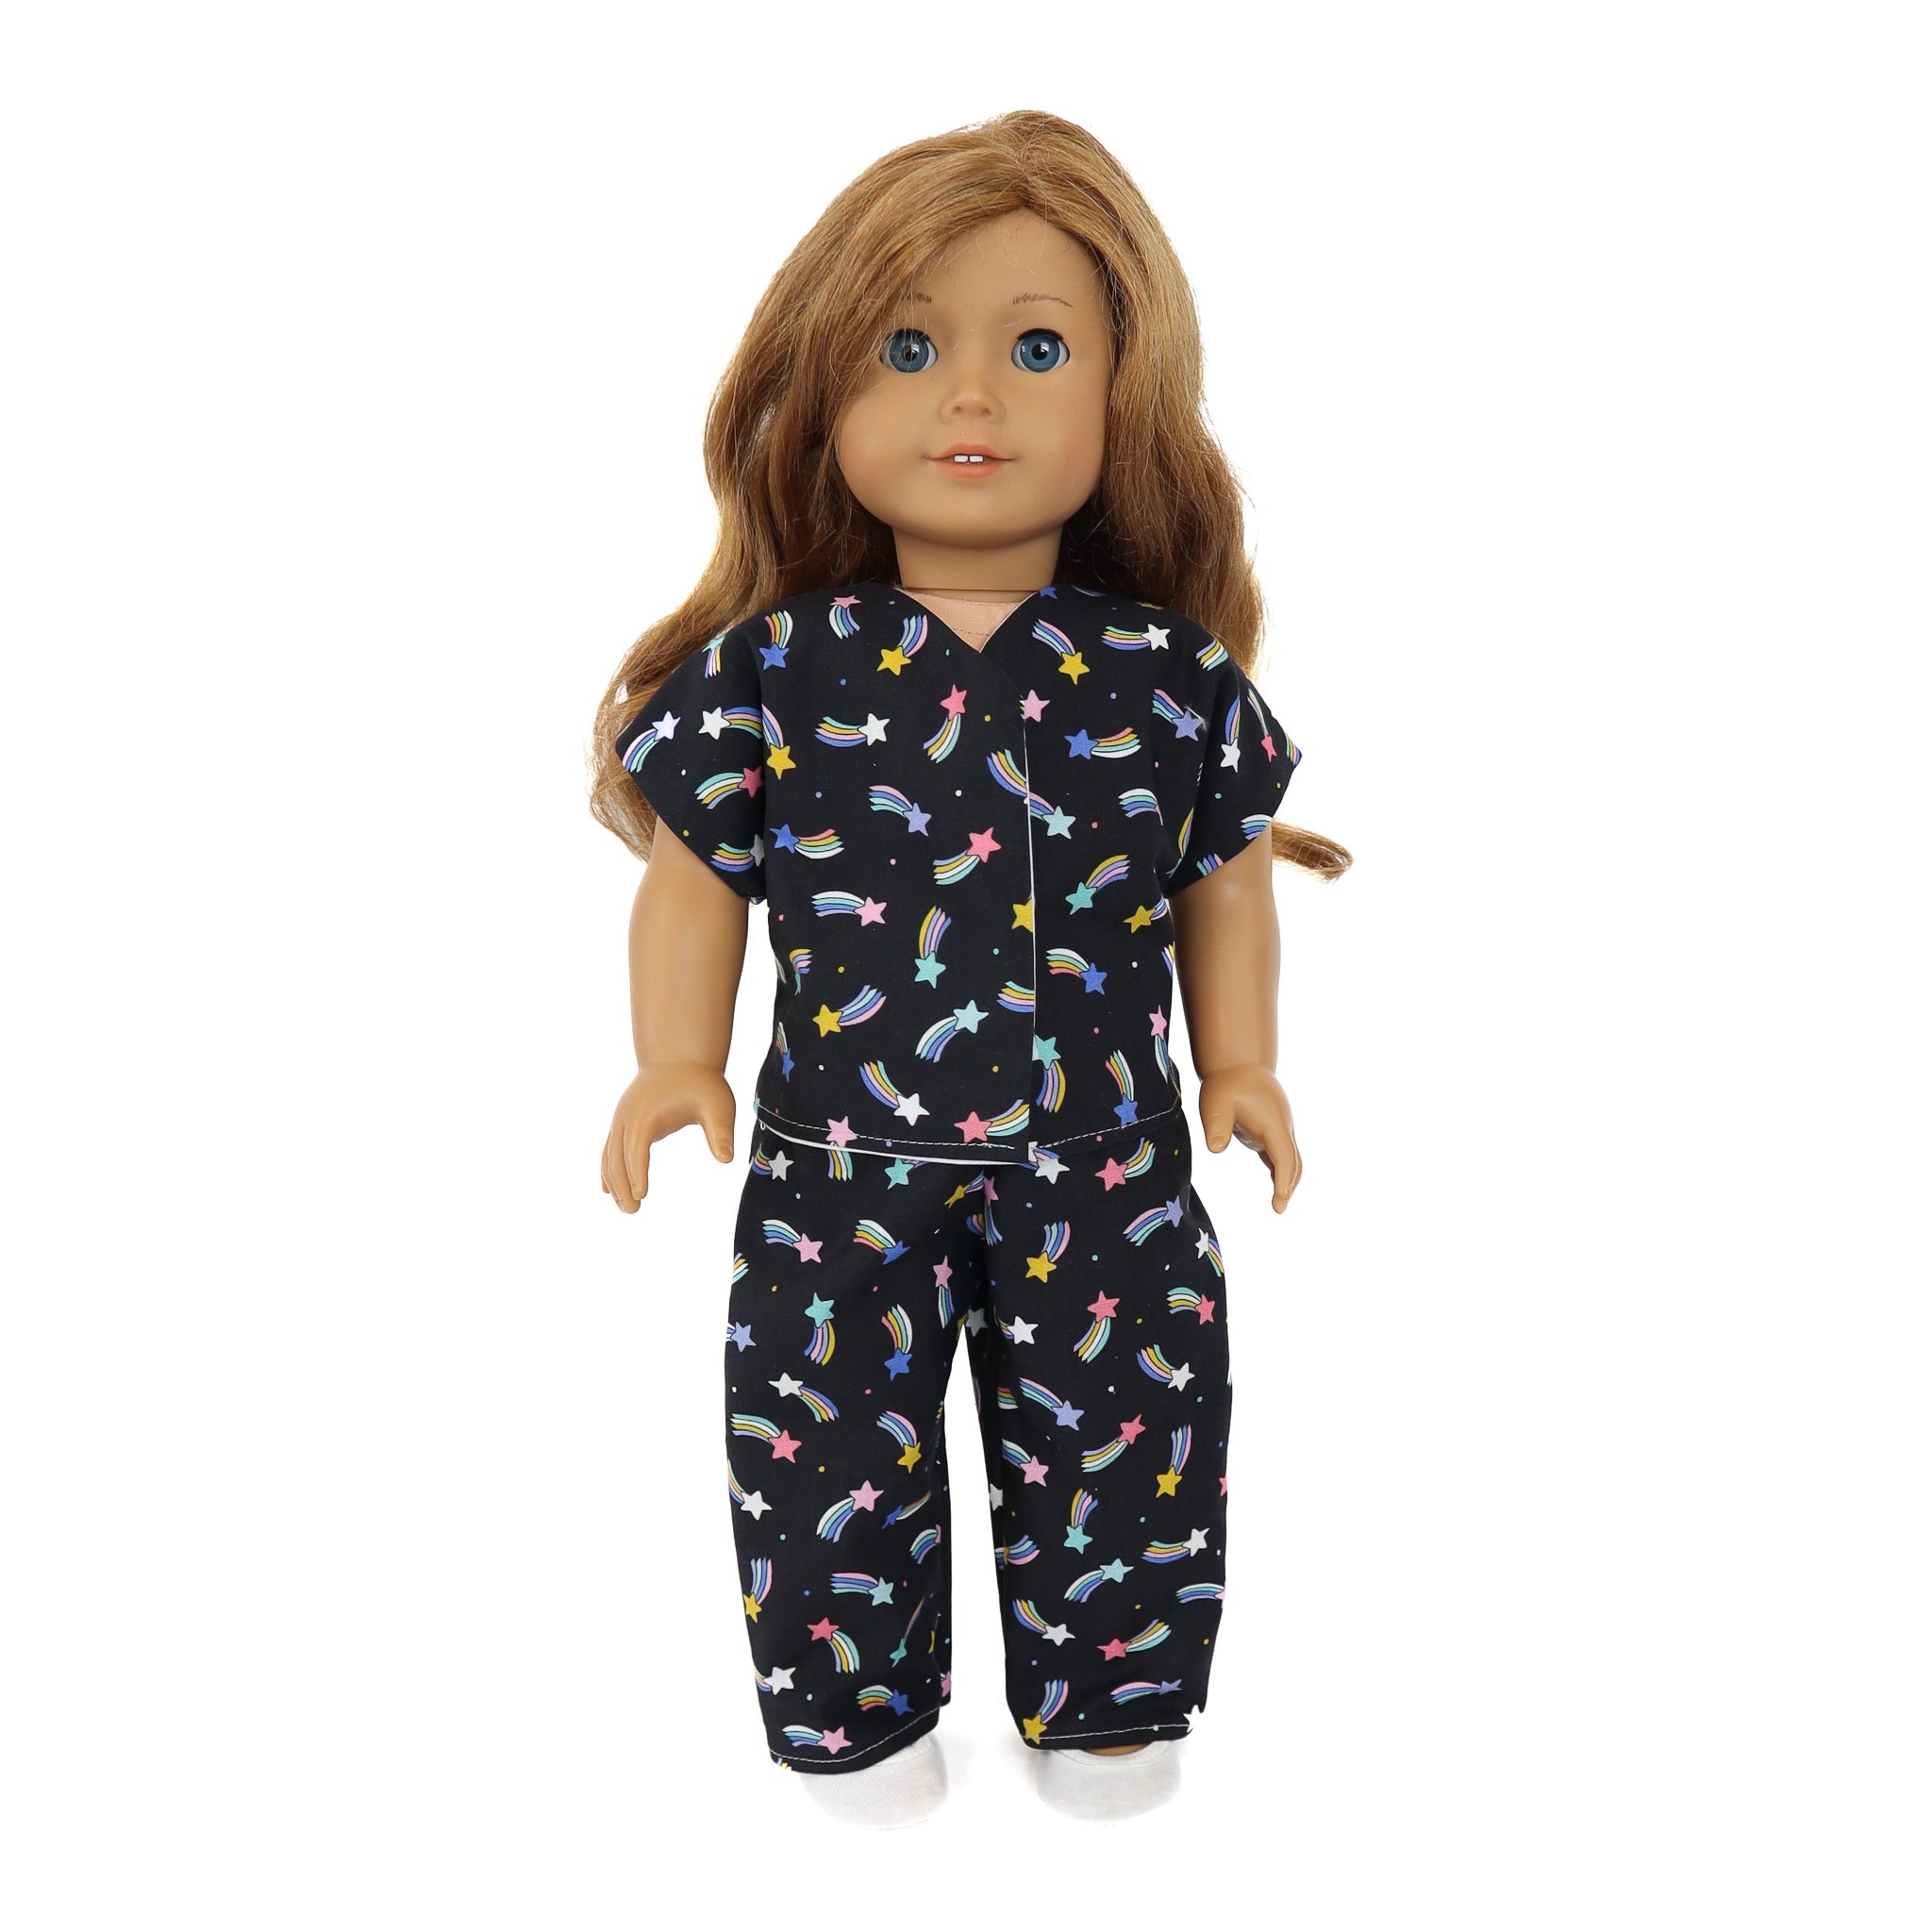 15 Styles Doll Pajamas & Nightgown Cute Pattern Fit 18 Inch